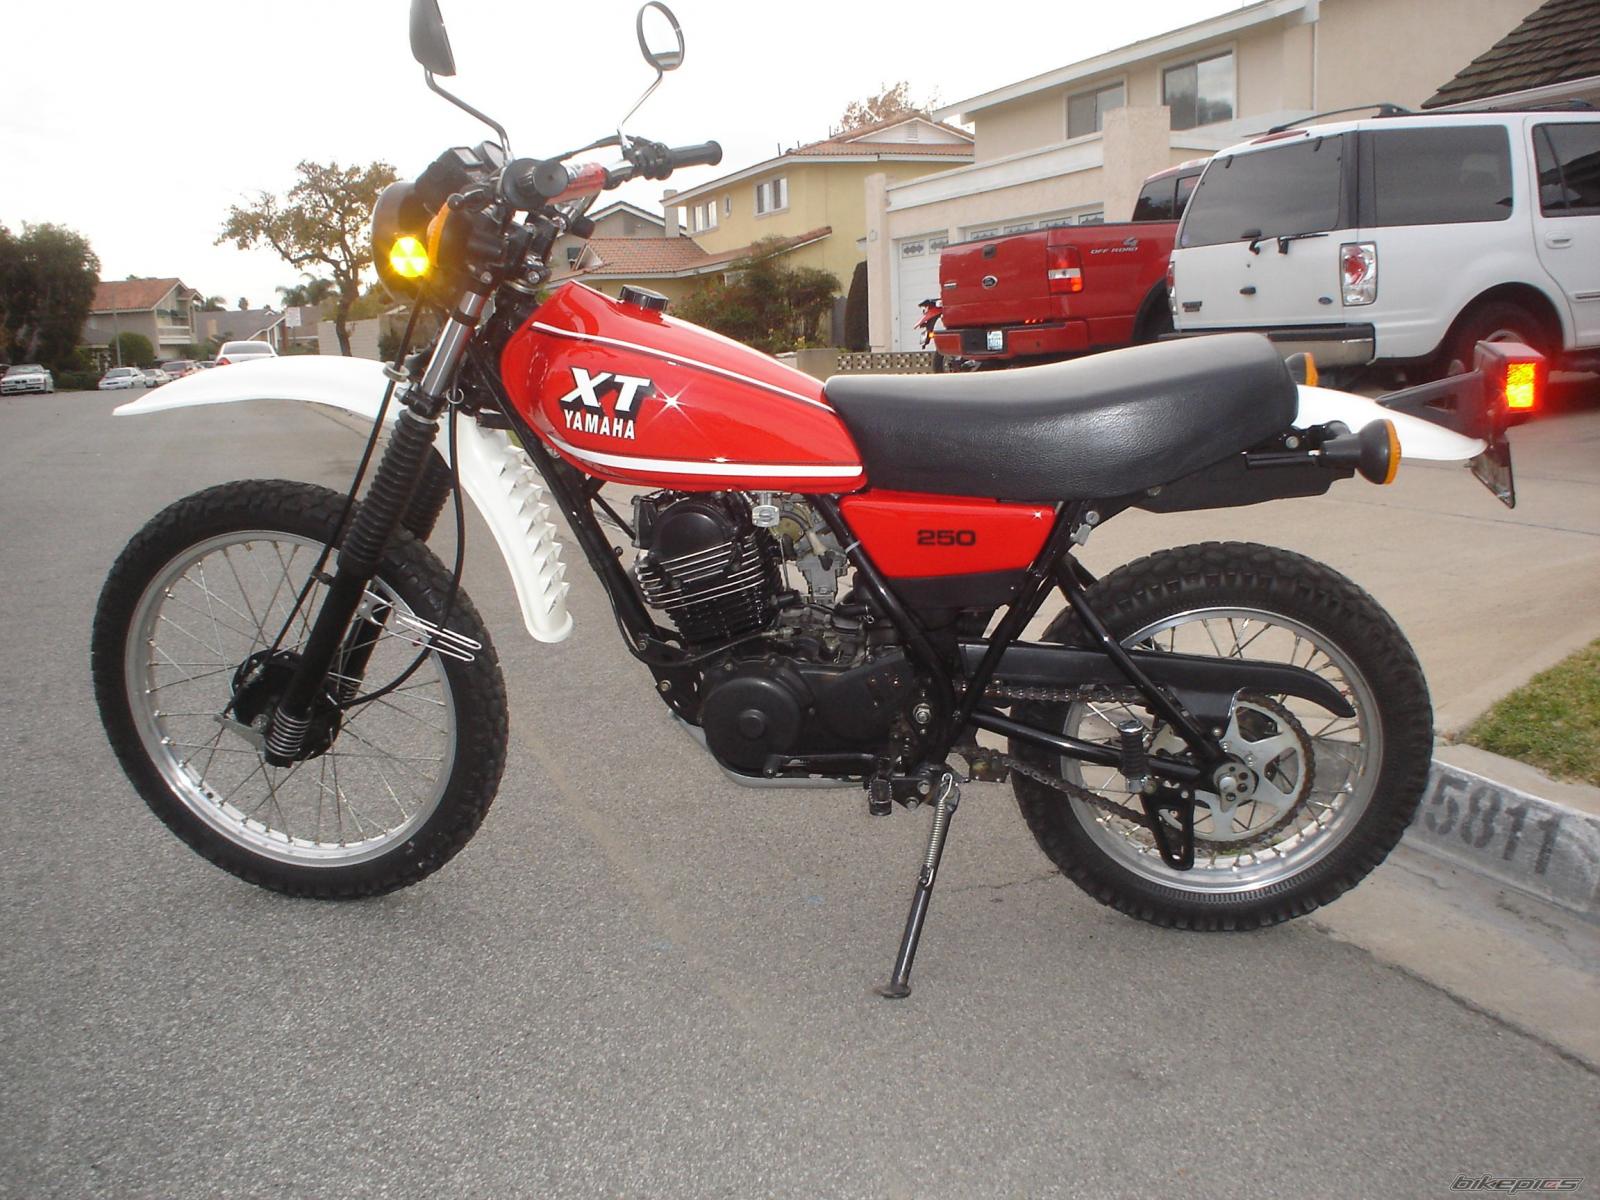 Review of Yamaha XT 250 1980: pictures, live photos 